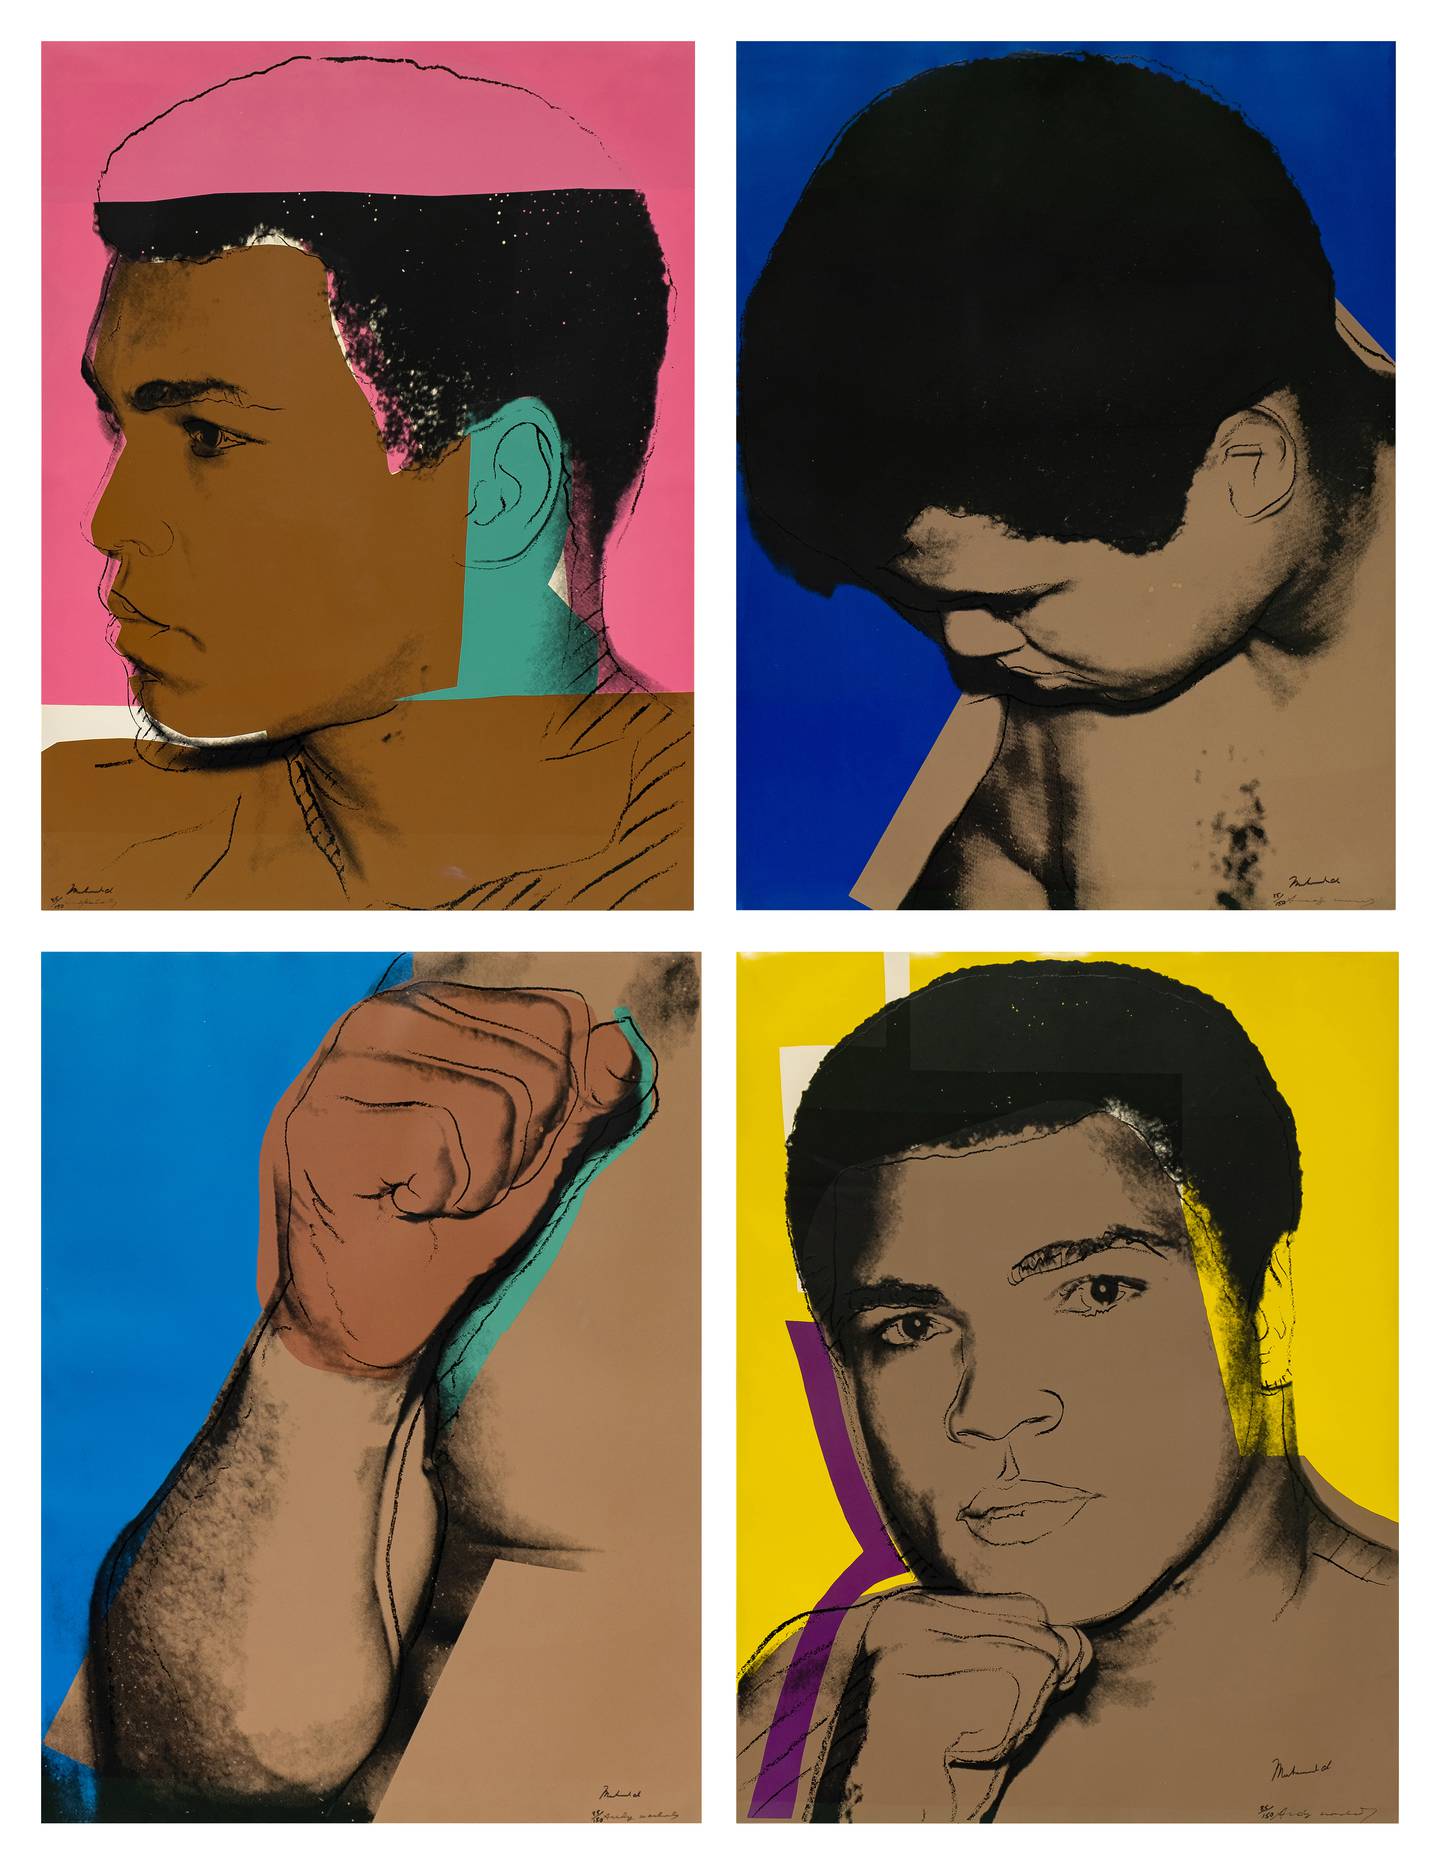 ‘Muhammad Ali’ by Andy Warhol was inspired by the fame and cultural relevance of athletes. Photo: Sotheby’s